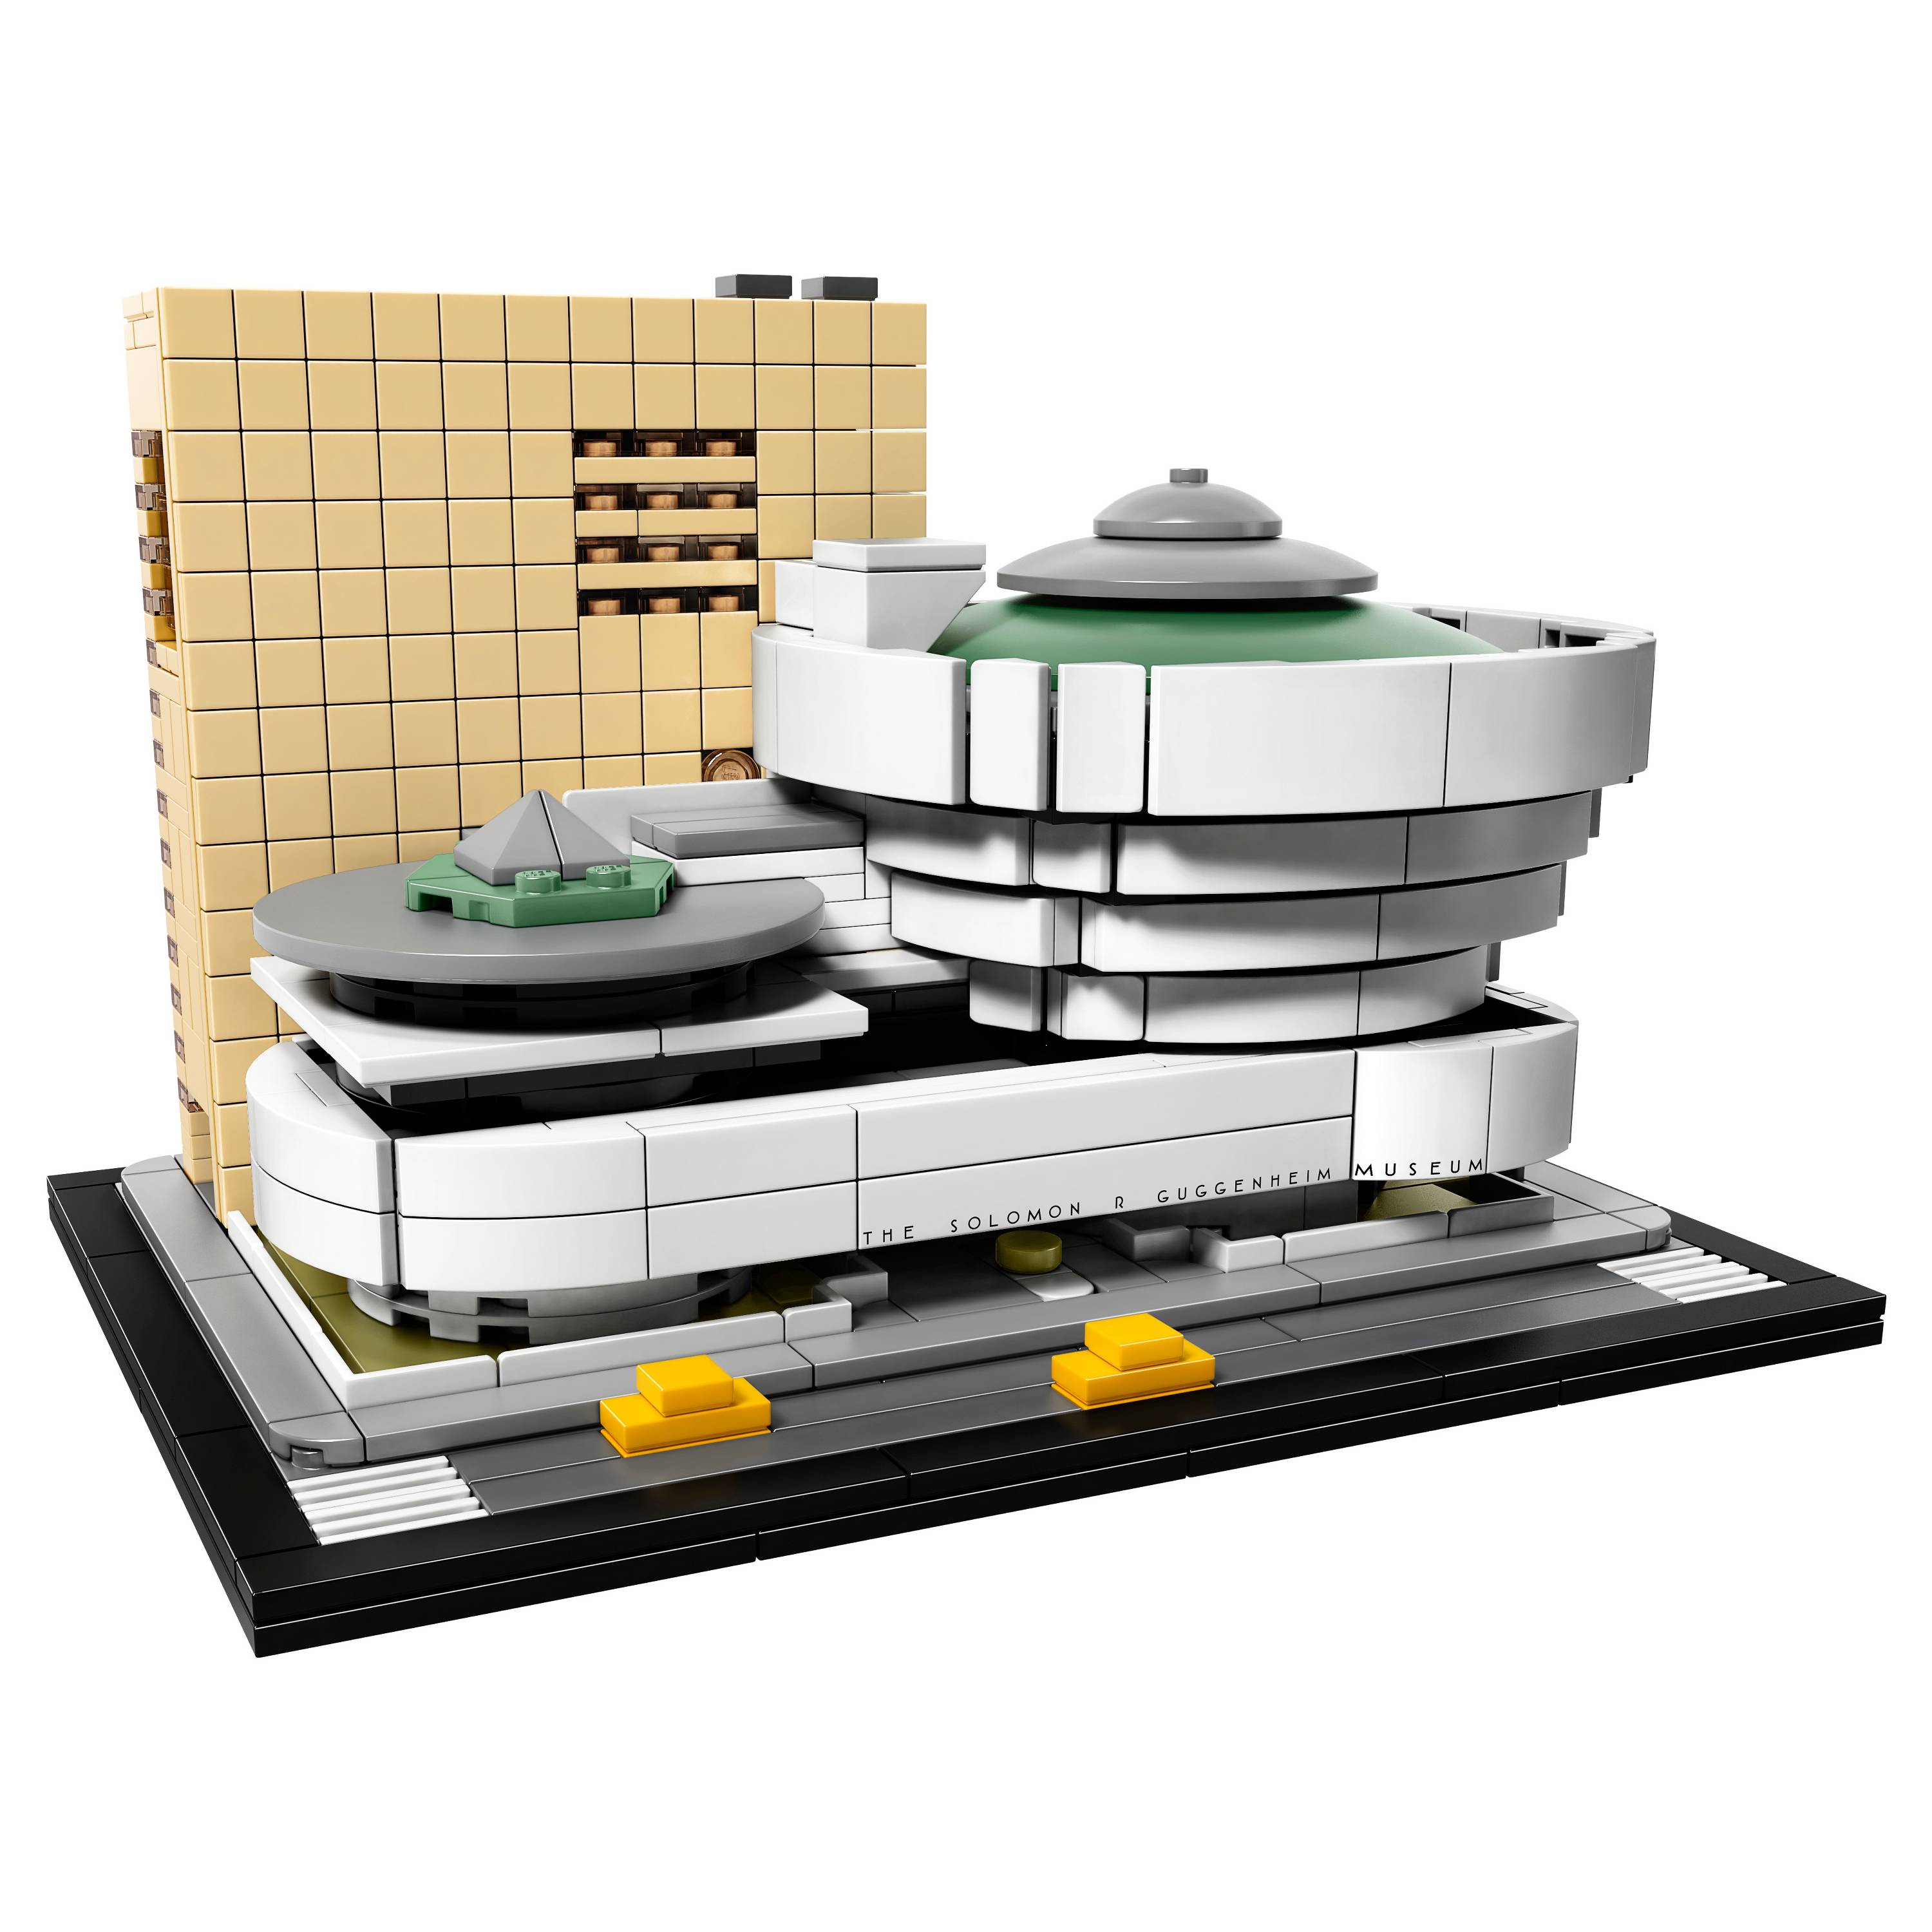 Shot of miniature model of museum with rotunda structure and adjoining tower made with plastic interlocking bricks. 